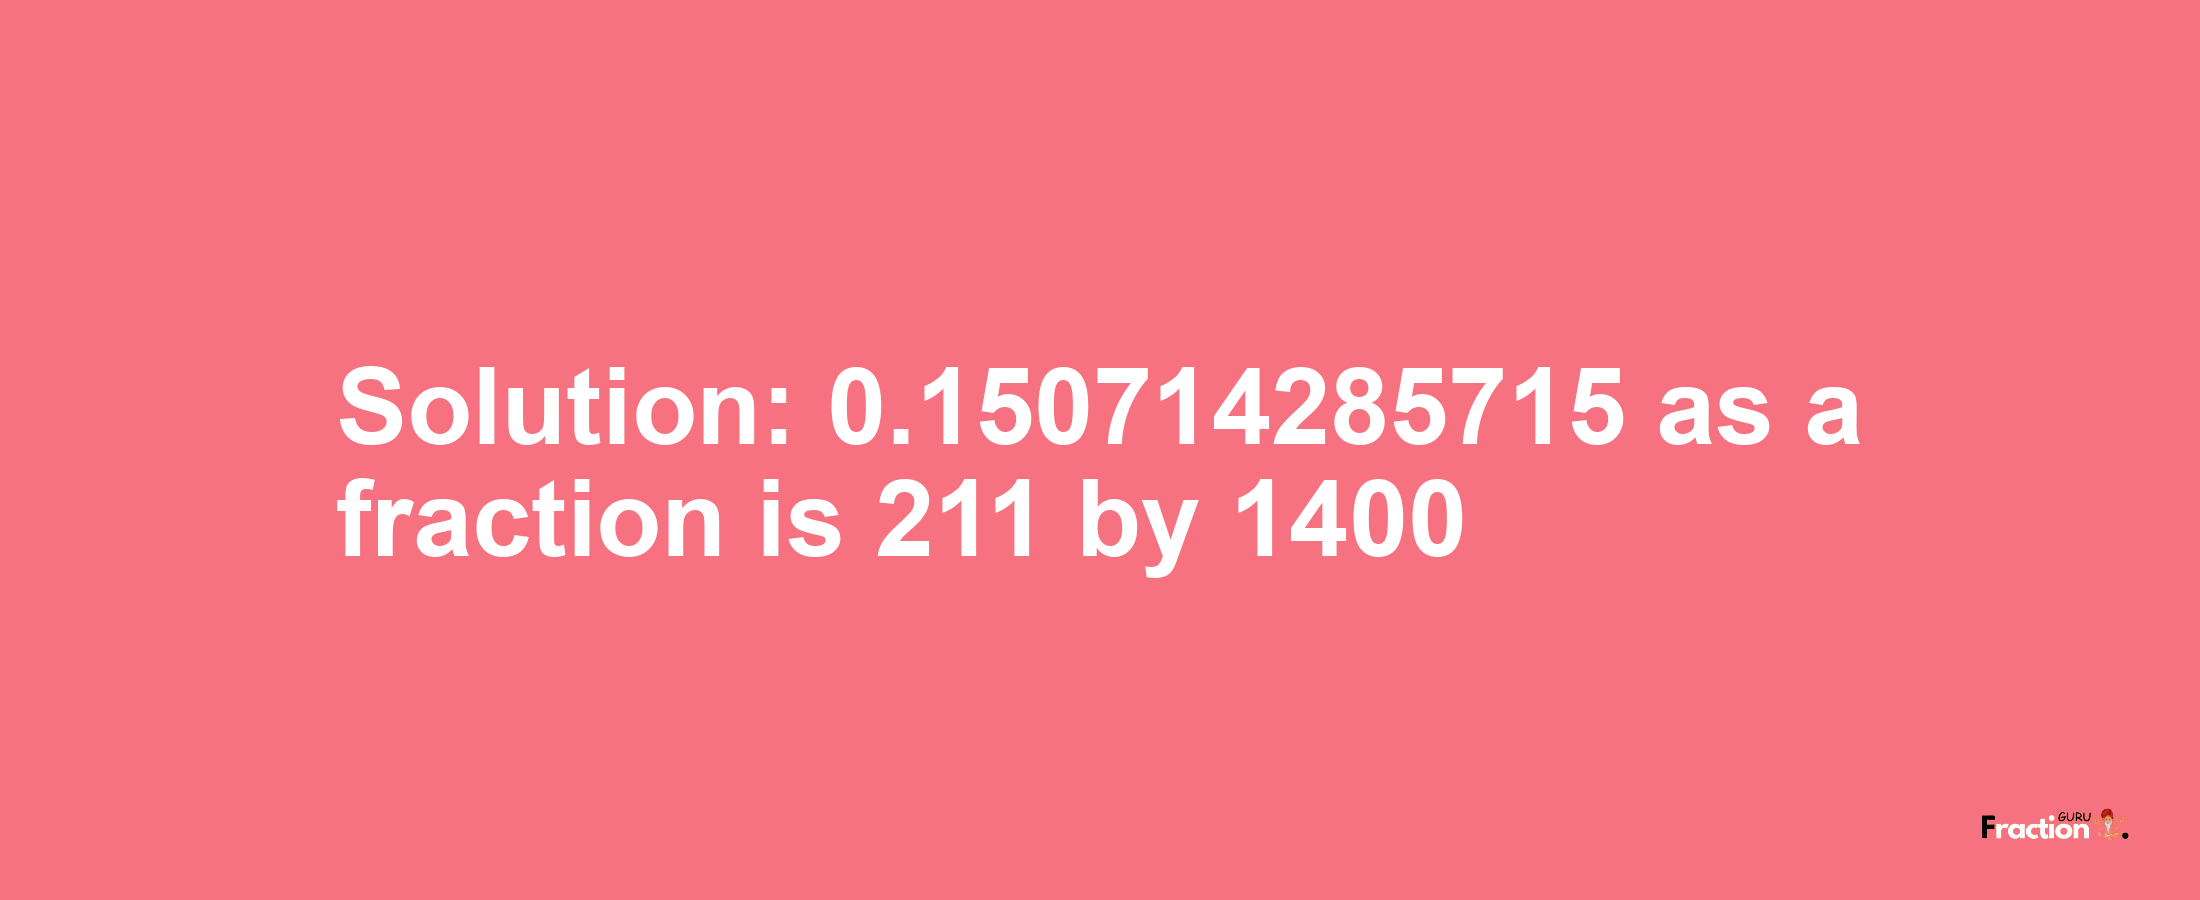 Solution:0.150714285715 as a fraction is 211/1400